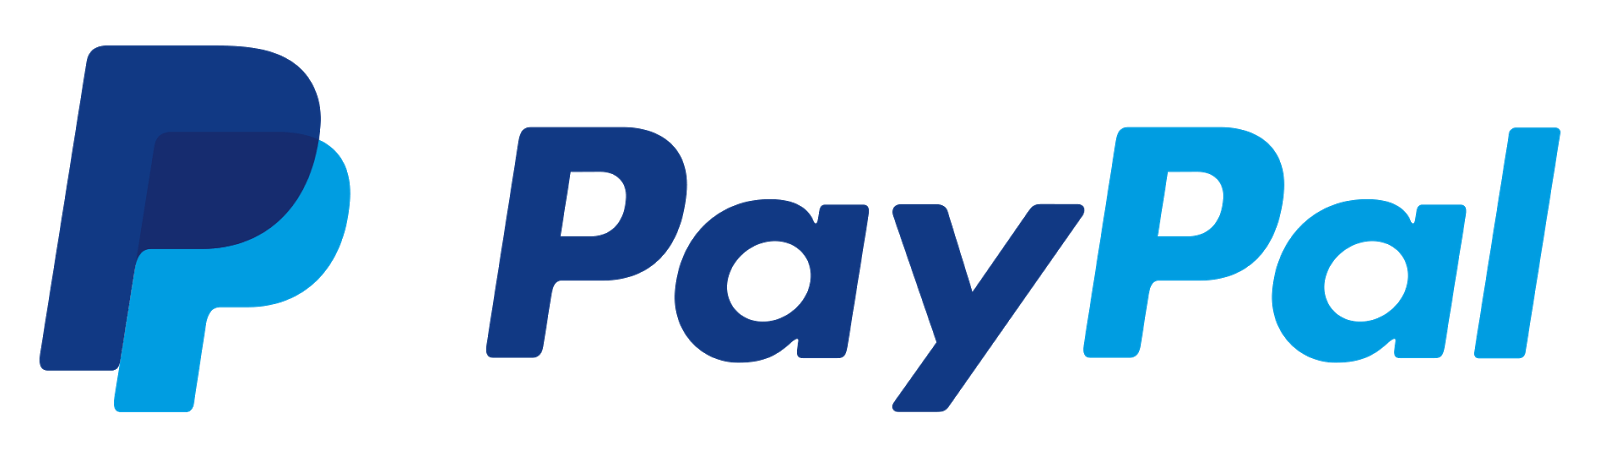 live-rates accepts paypal